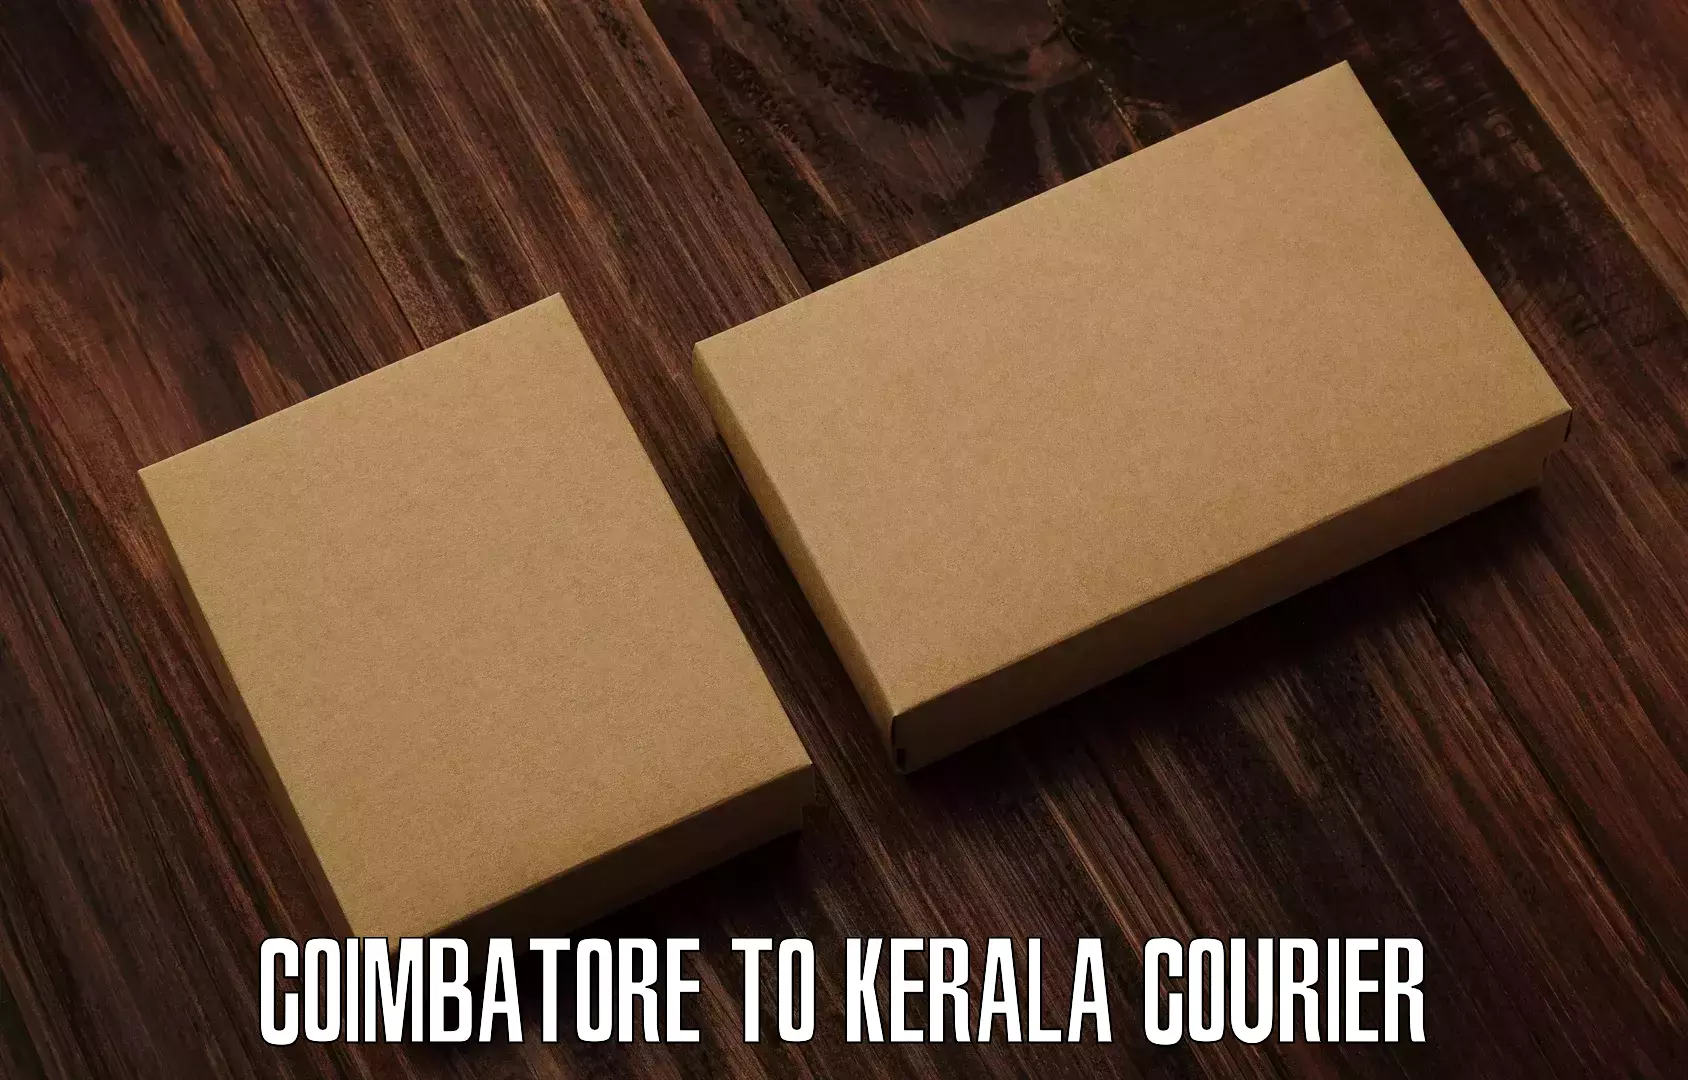 Nationwide delivery network Coimbatore to Kerala